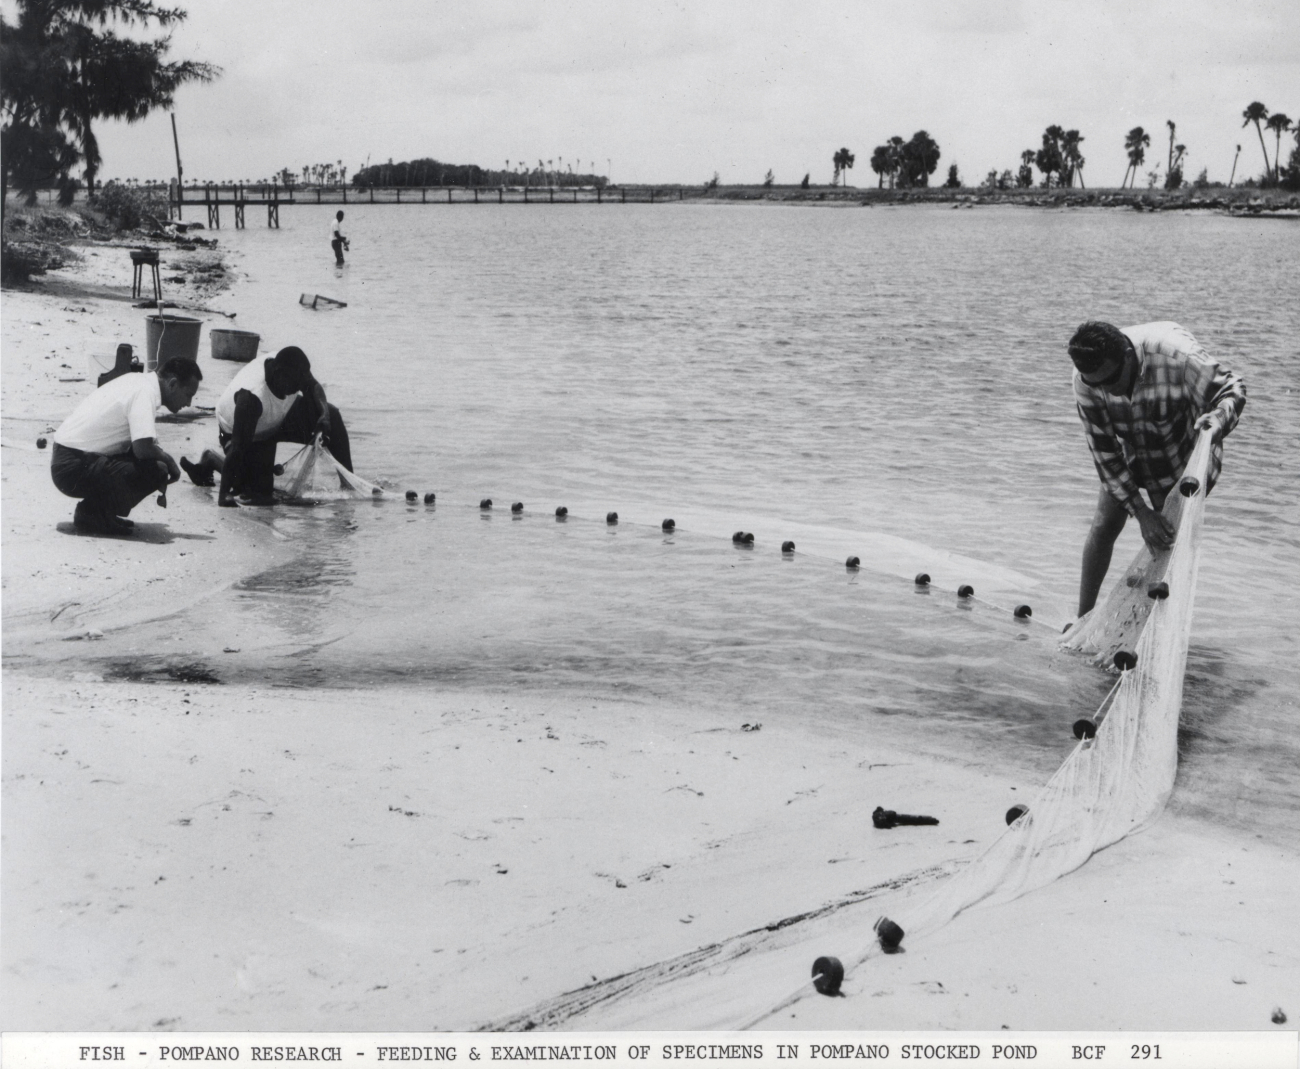 Feeding and examination of pompano specimens in stocked pond at Fort De SotoPark